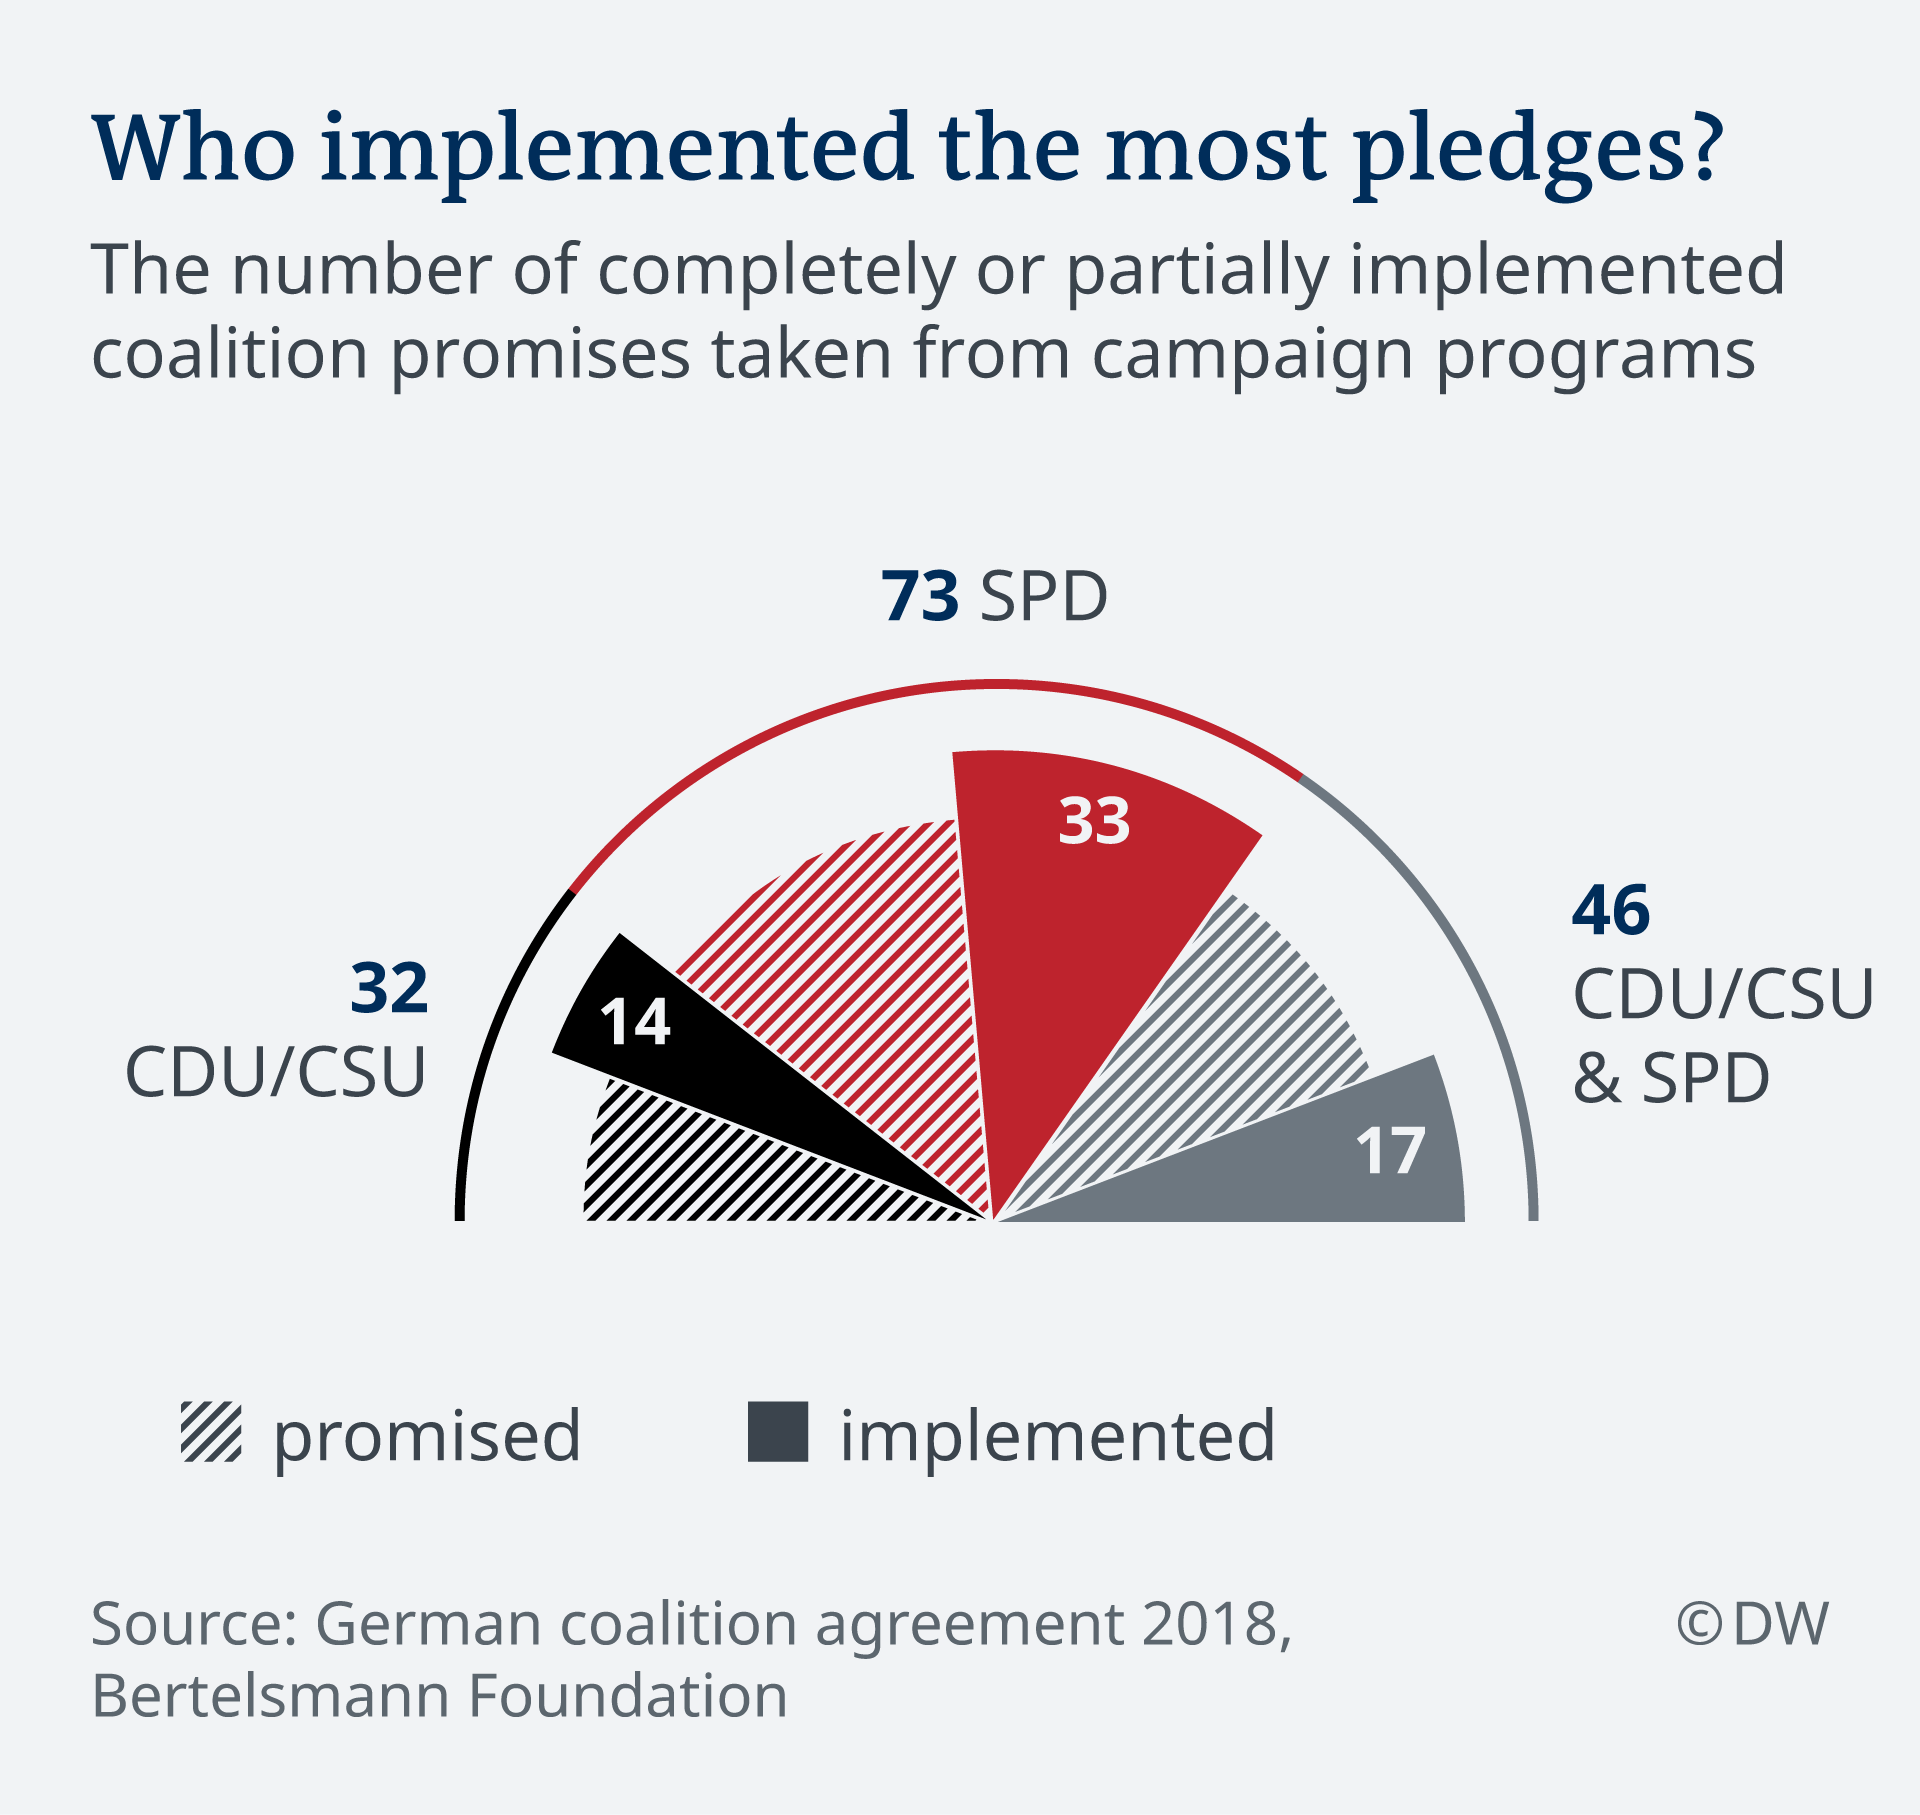 The number of completely or partially implemented coalition promises taken from campaign programs 